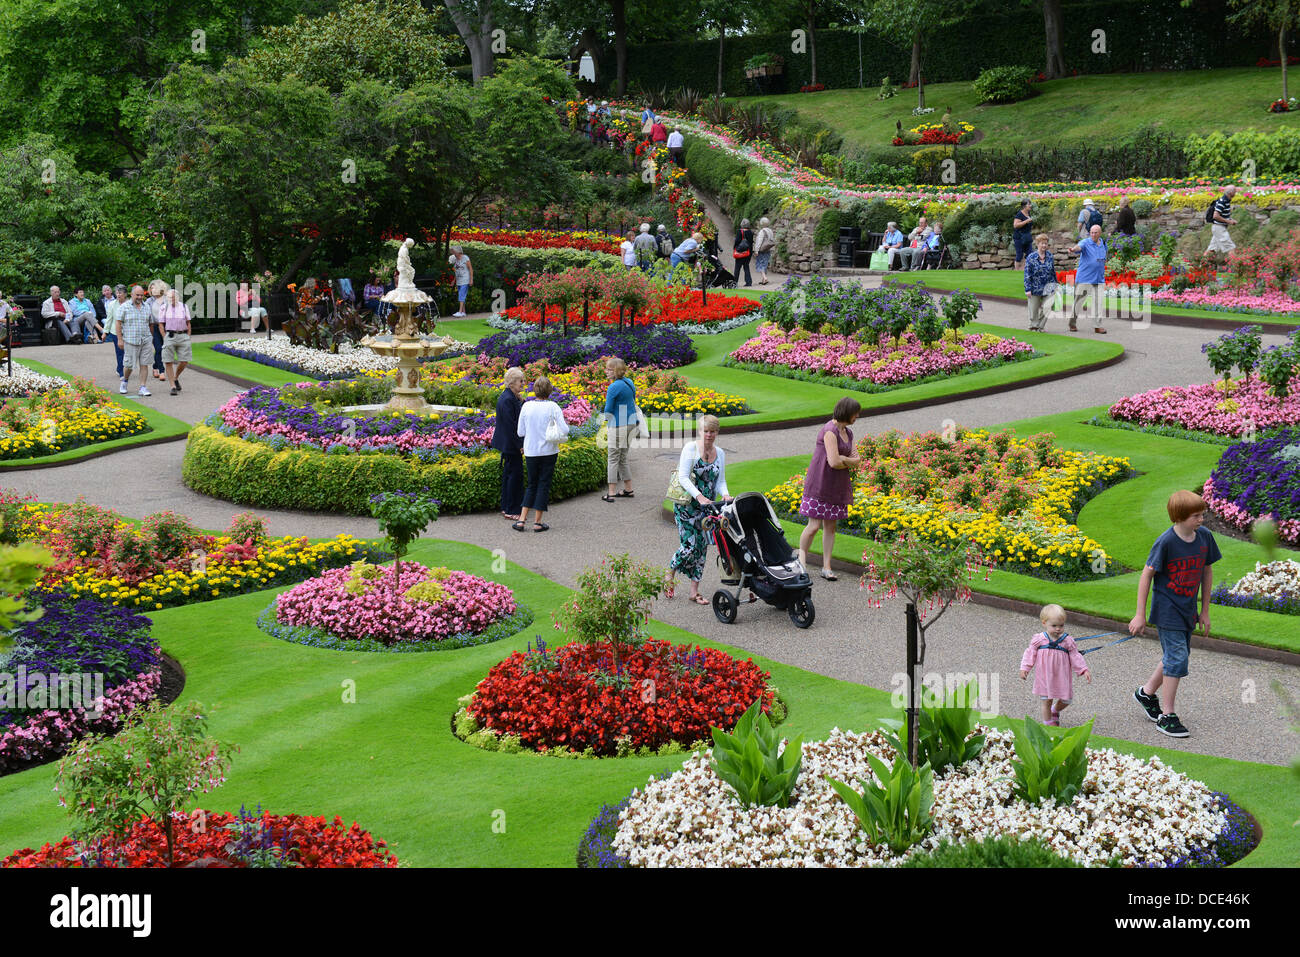 the dingle flower garden in shrewsbury which is the centrepiece of